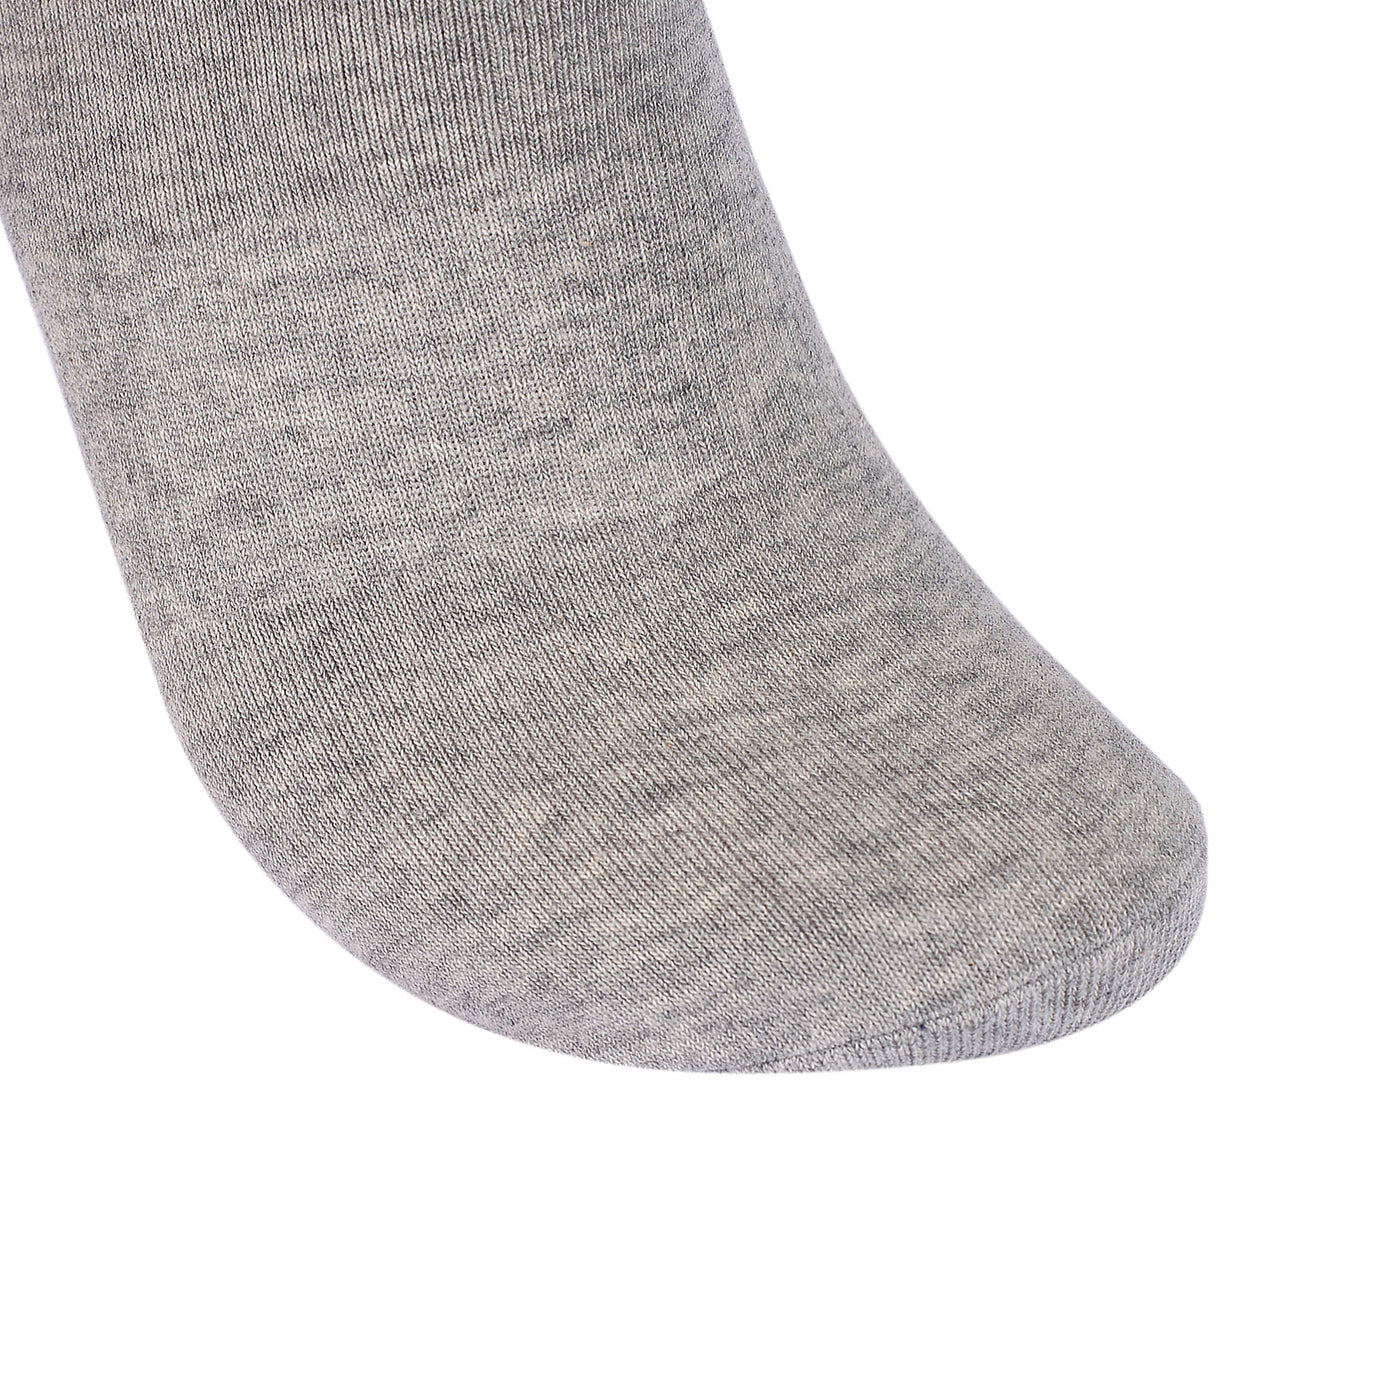 Laulax Ladies 6 Pairs Finest Combed Cotton Arch Support Trainer Socks, Grey, Size UK 3 - 5 / Europe 36 - 38